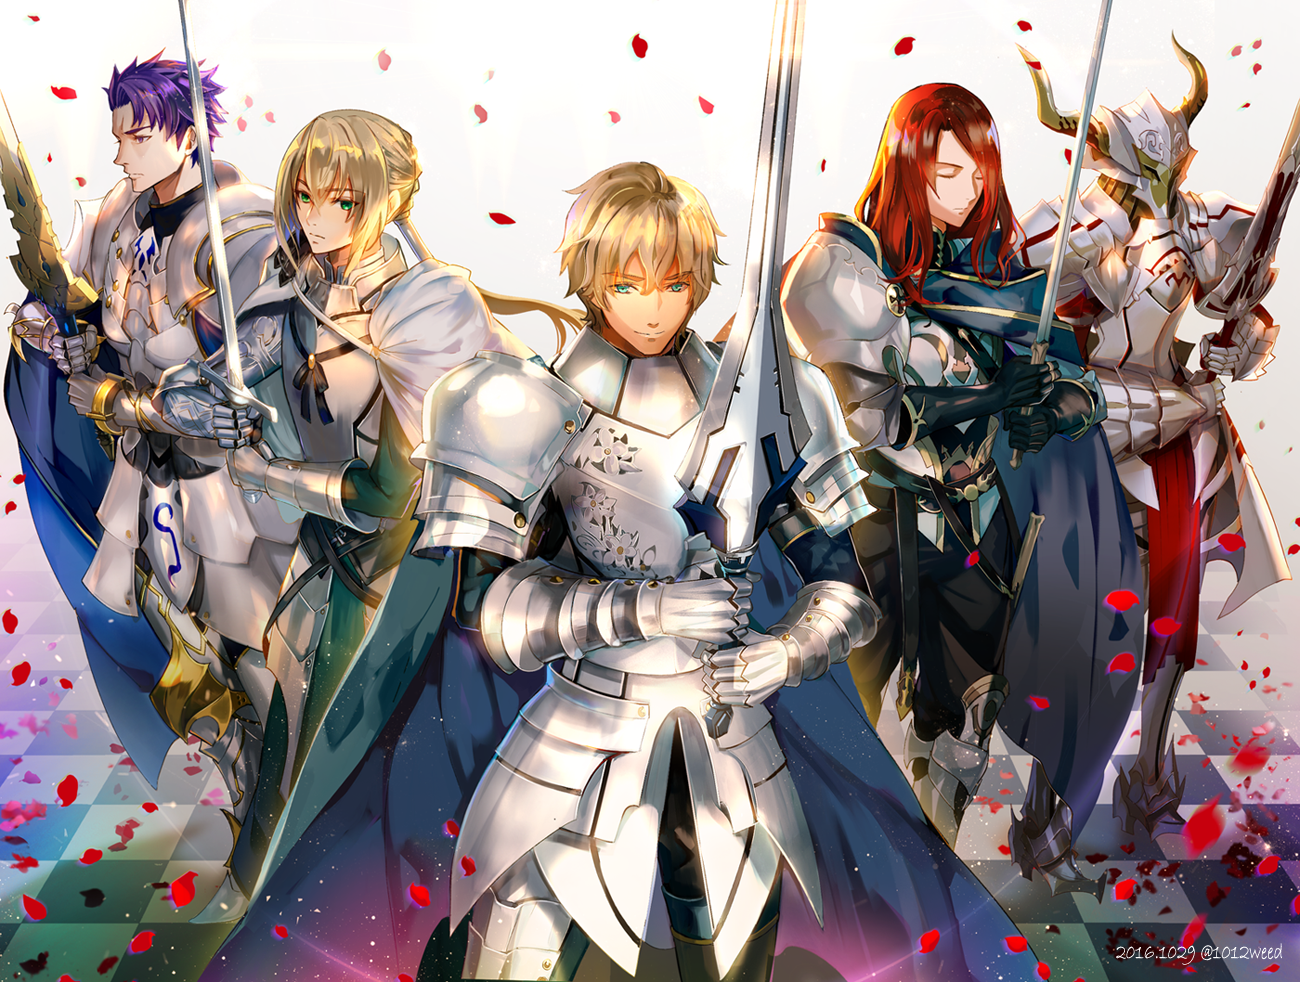 Knights of the Round Table - Art, Anime art, Fate, Fate grand order, Gawain, Artoria pendragon, Mordred, Lancelot